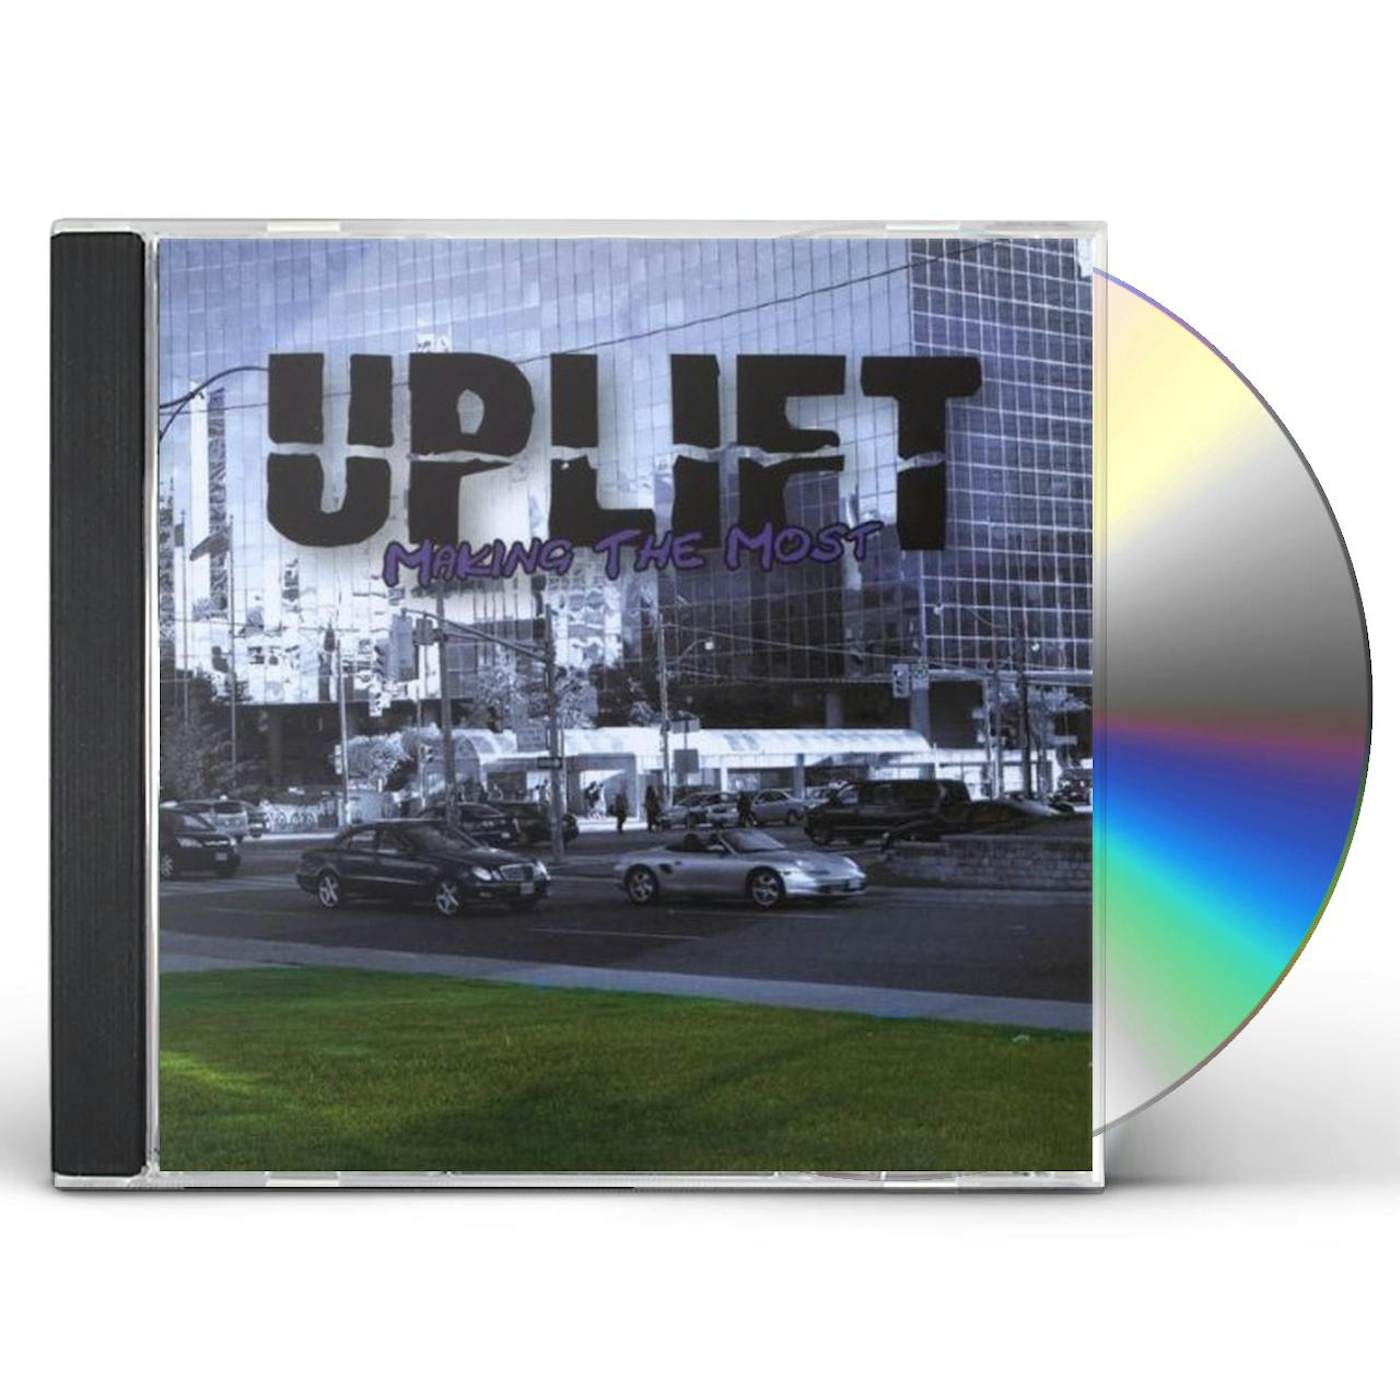 Uplift MAKING THE MOST CD